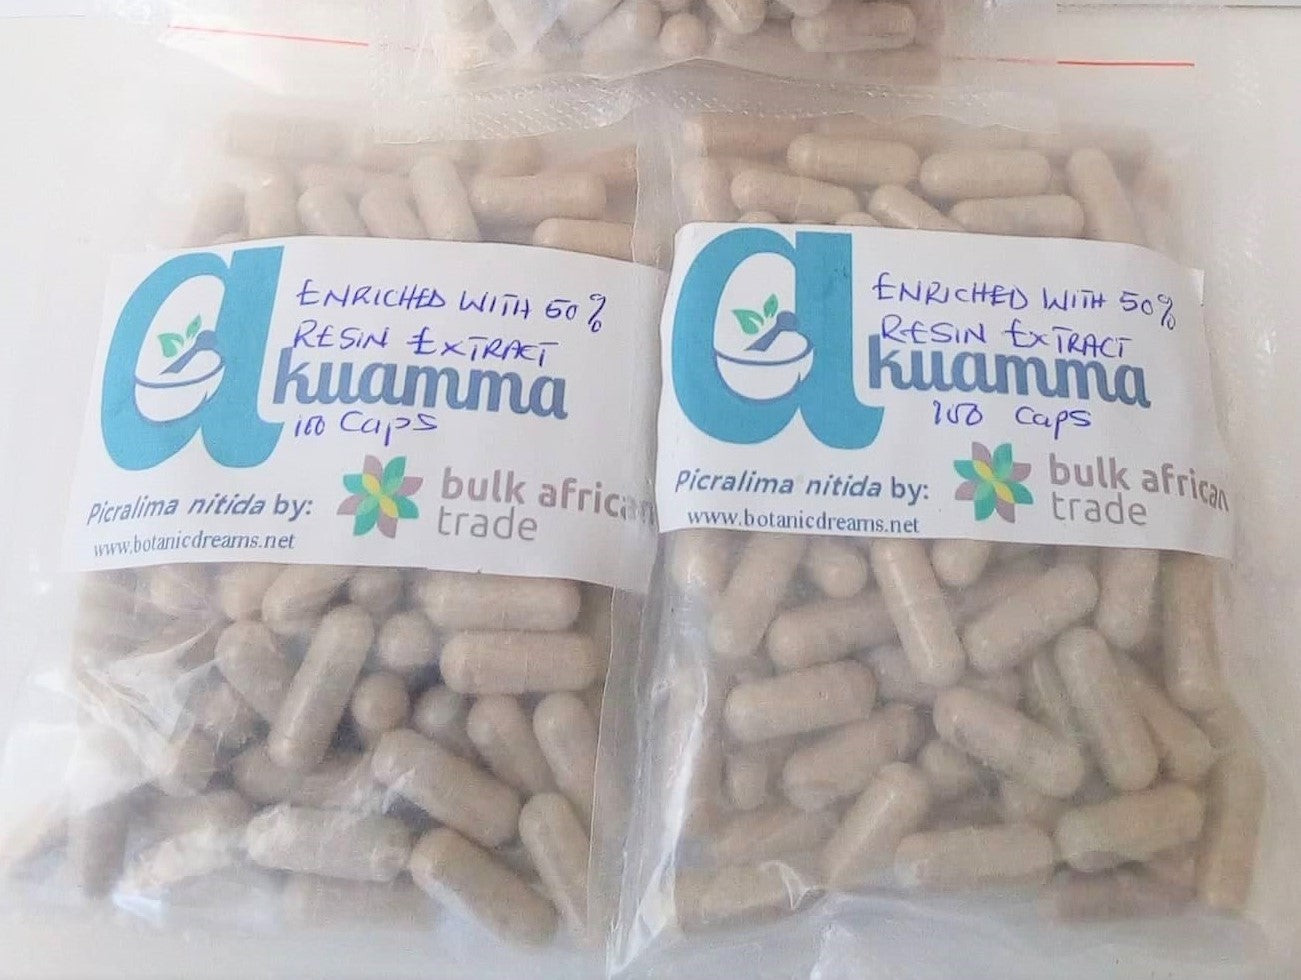 Akuamma Capsules enriched with 50% resin